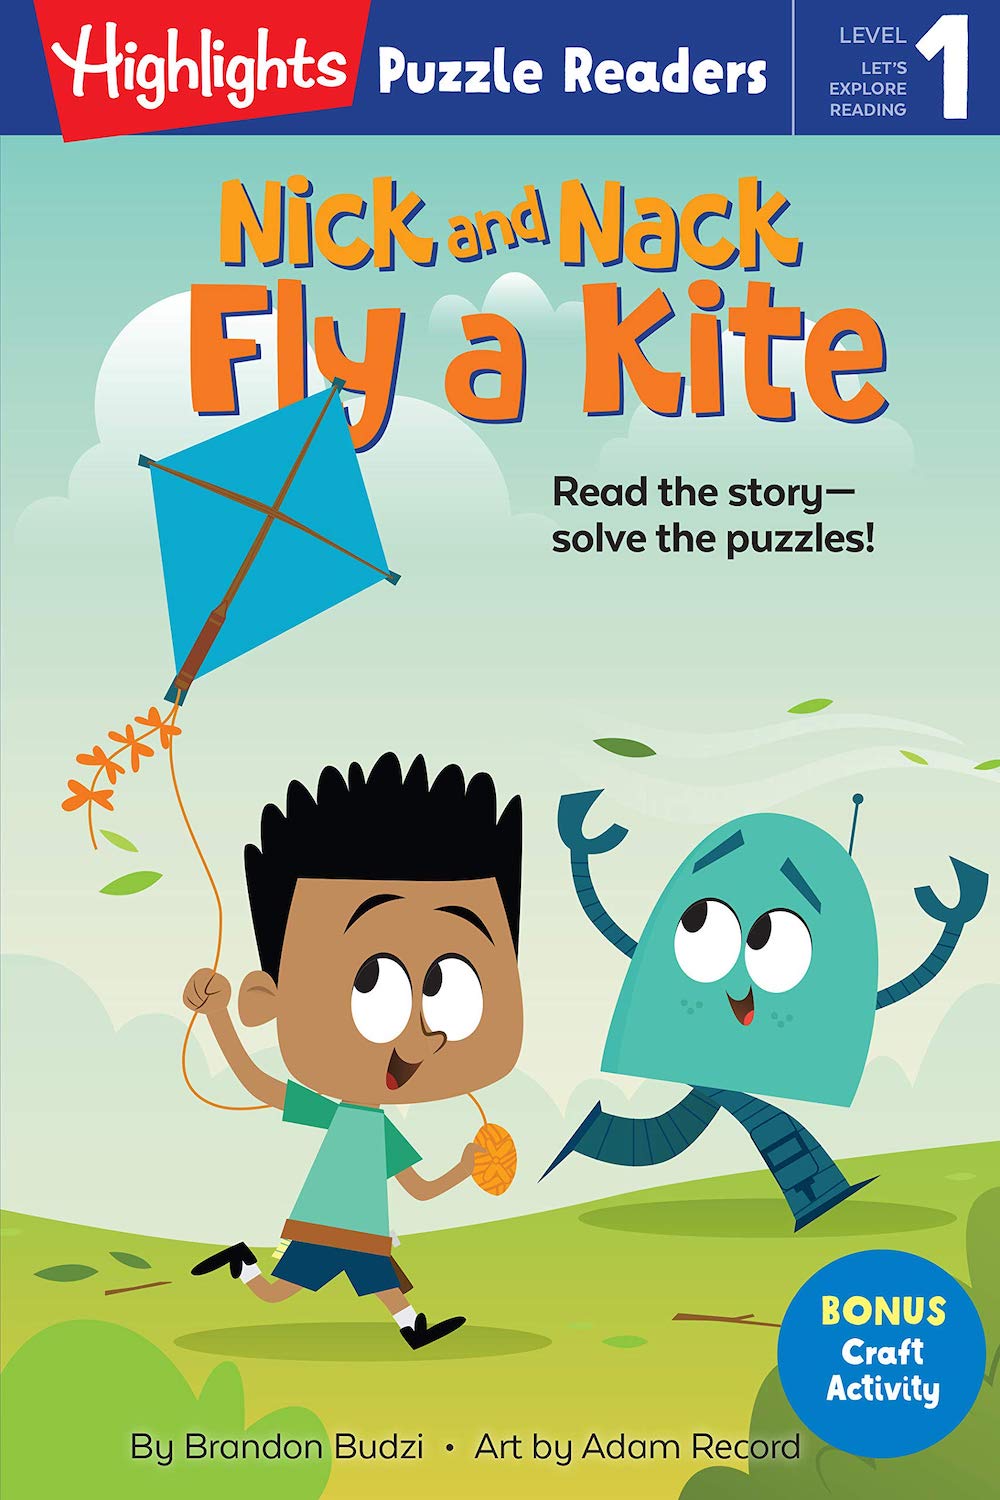 Nick and Nack Fly a Kite (Highlights Puzzle Readers)